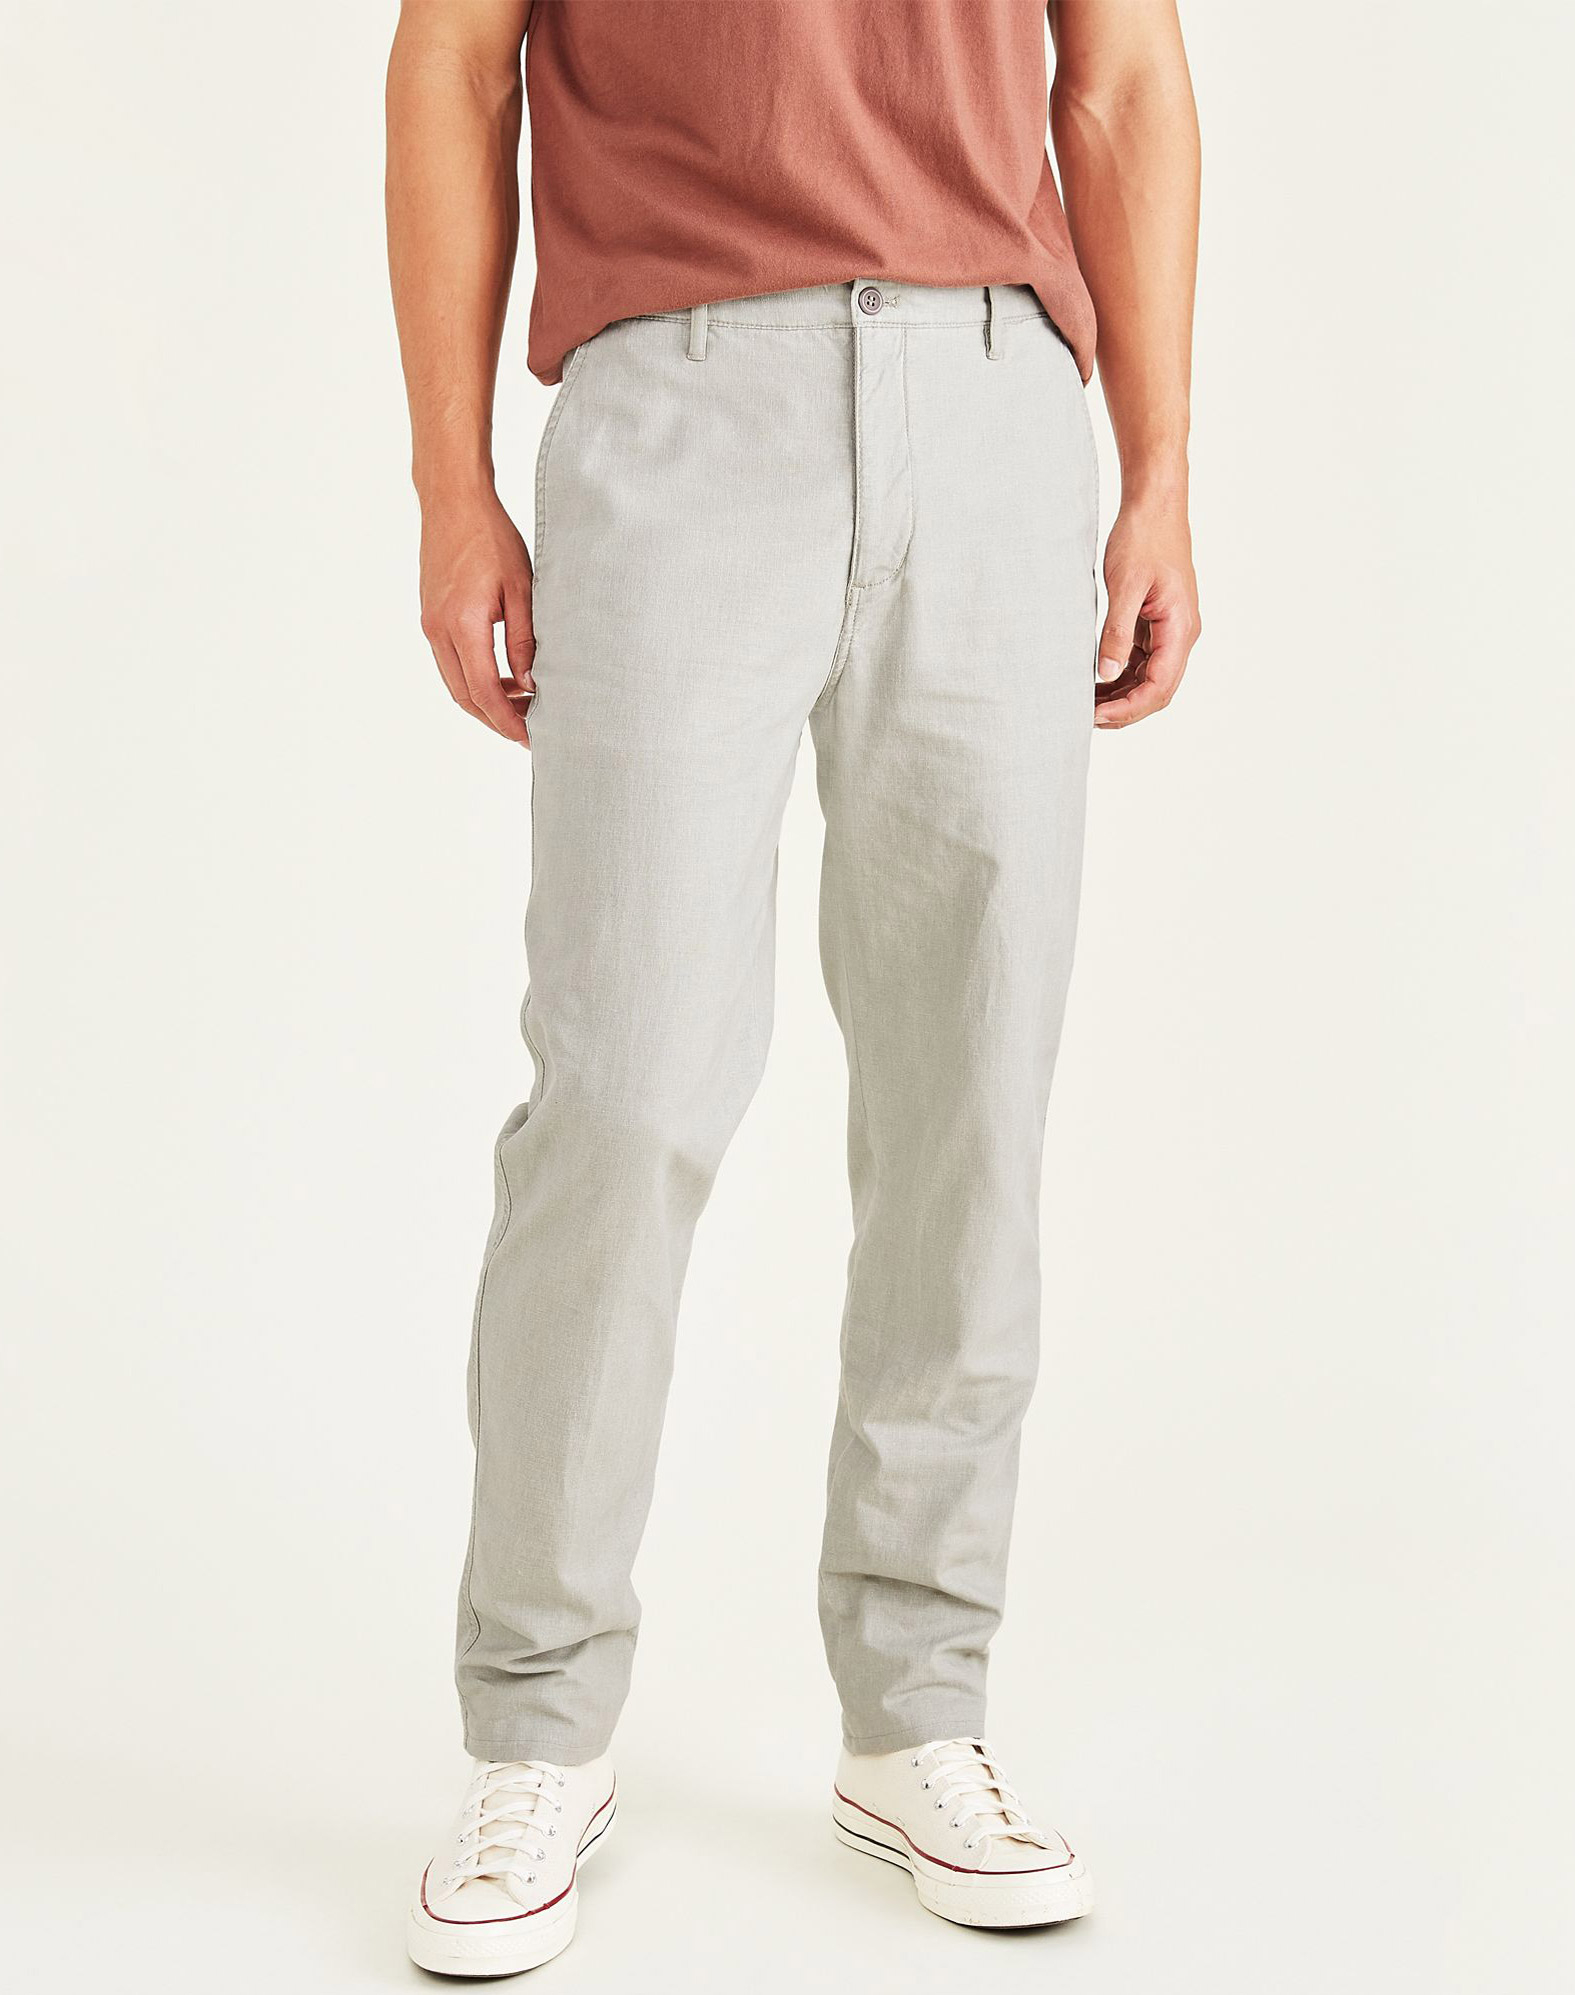 Dockers pantalons d'home Alpha Icon chino tapered lightweight A1165-0022 blanc trencat